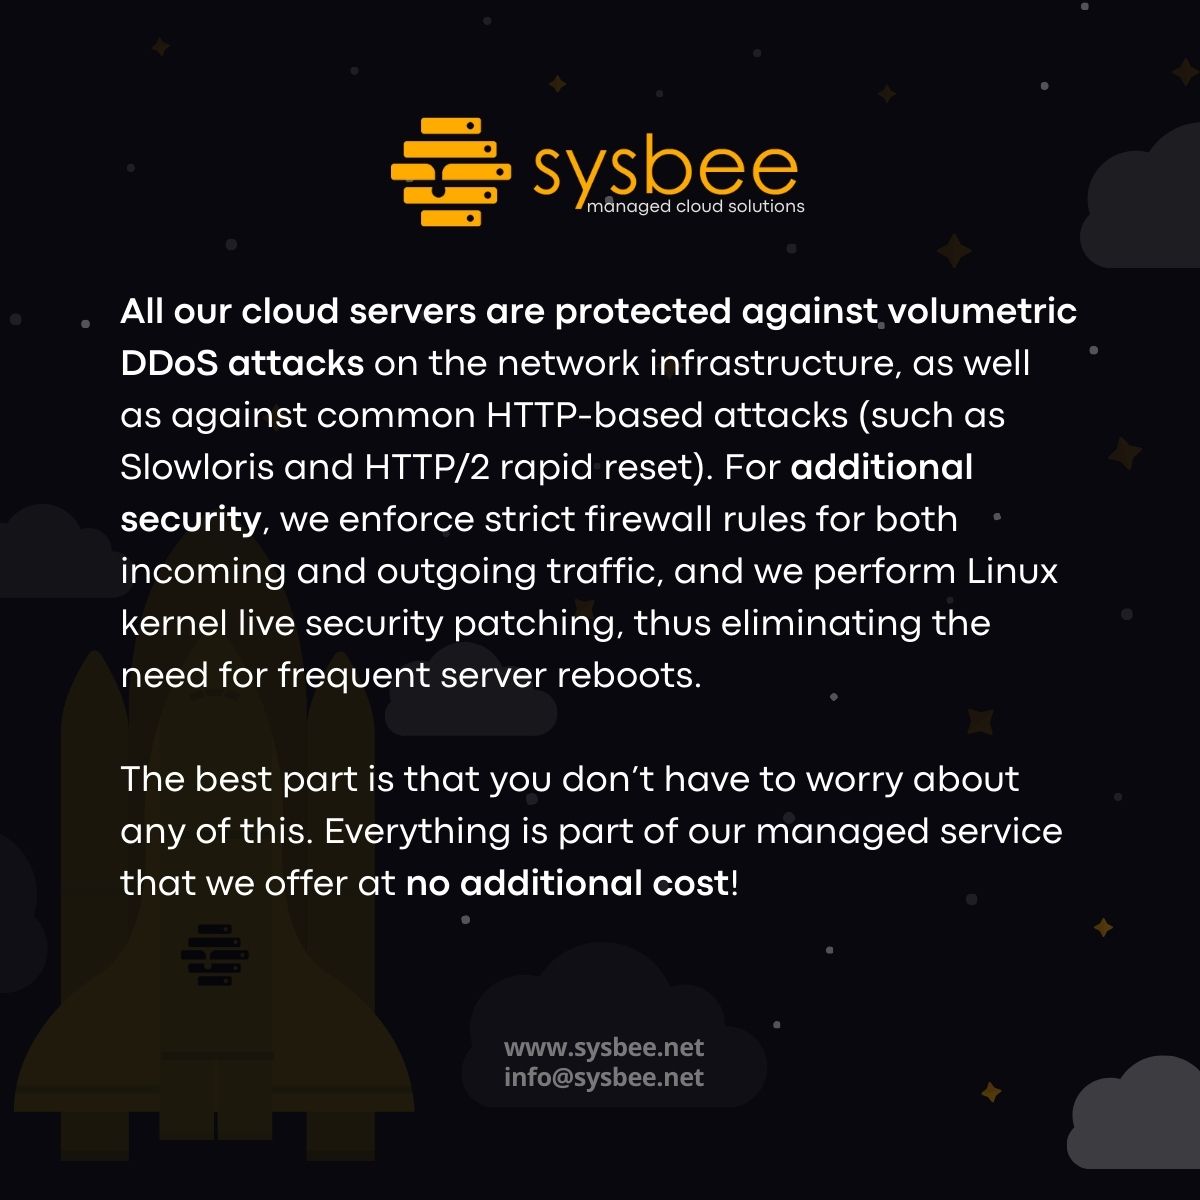 In Q3 2023, HTTP #DDoSattack traffic increased by 65% compared to Q2 2023.
All Sysbee Cloud Servers are protected against volumetric DDoS attacks, and you don’t have to worry about this.

Cyber Week deals are still active. → sysb.ee/managedcloud

#DDoS #Wordpress #magento